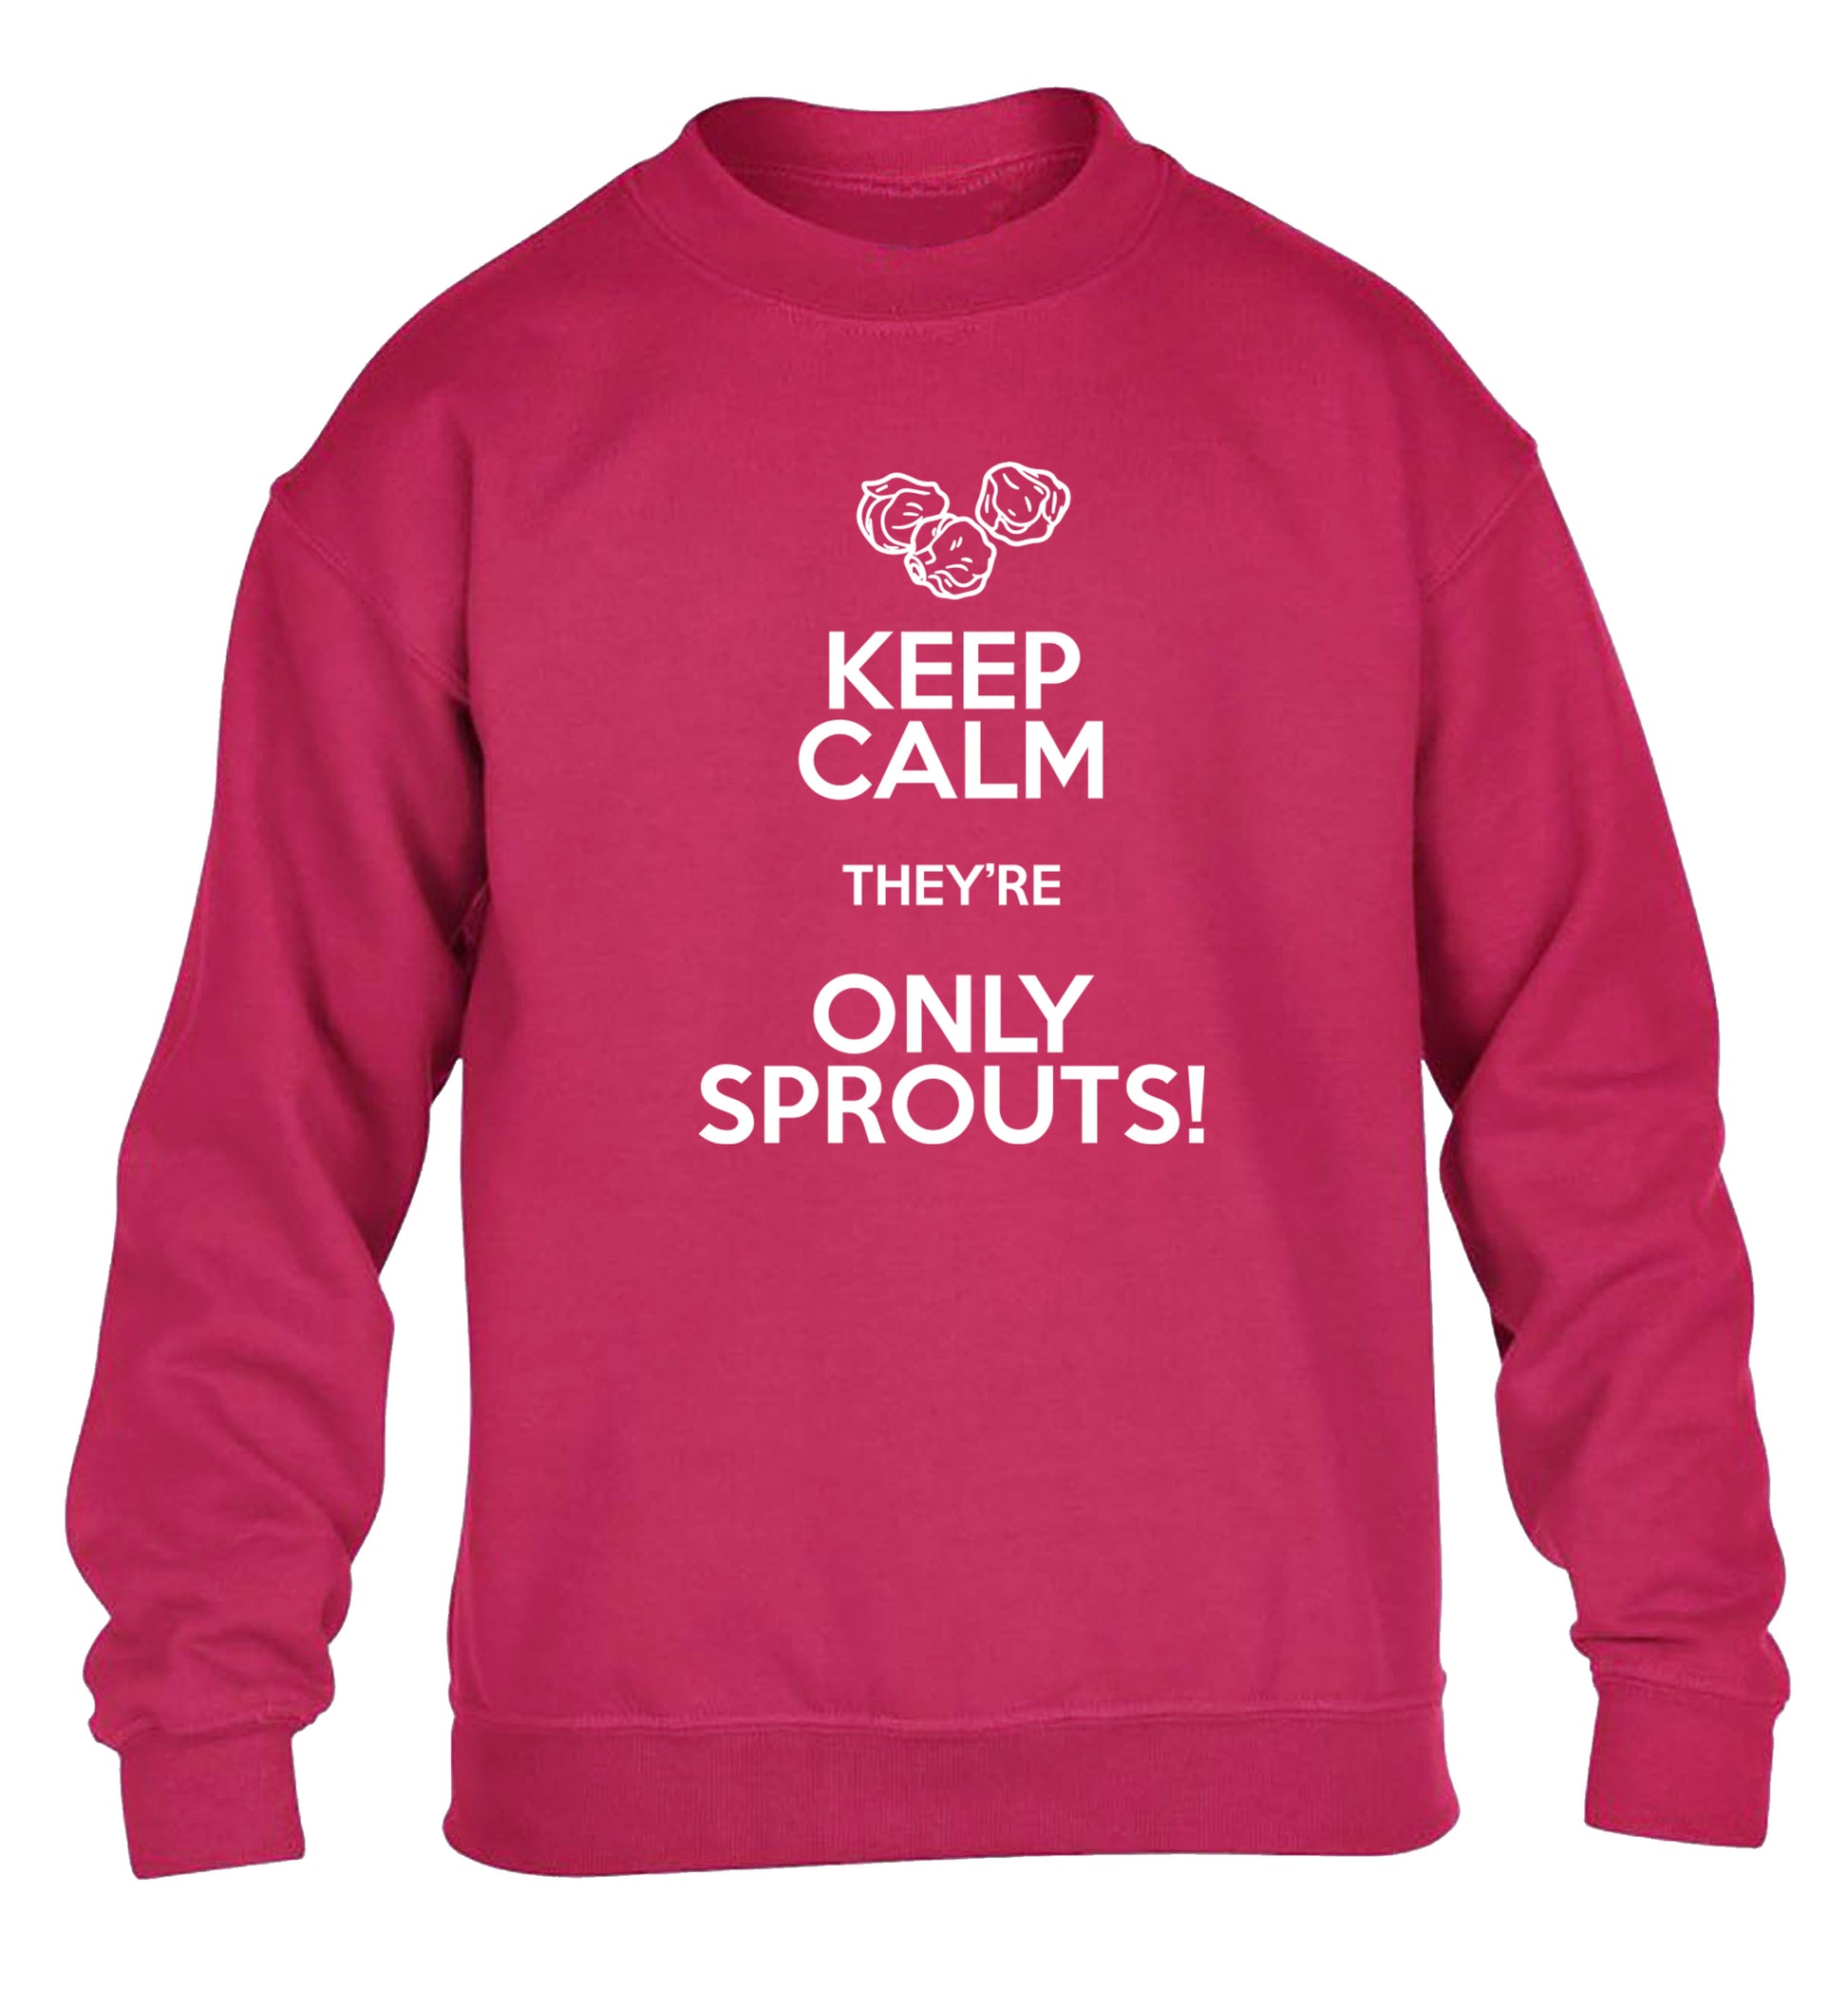 Keep calm they're only sprouts children's pink sweater 12-13 Years